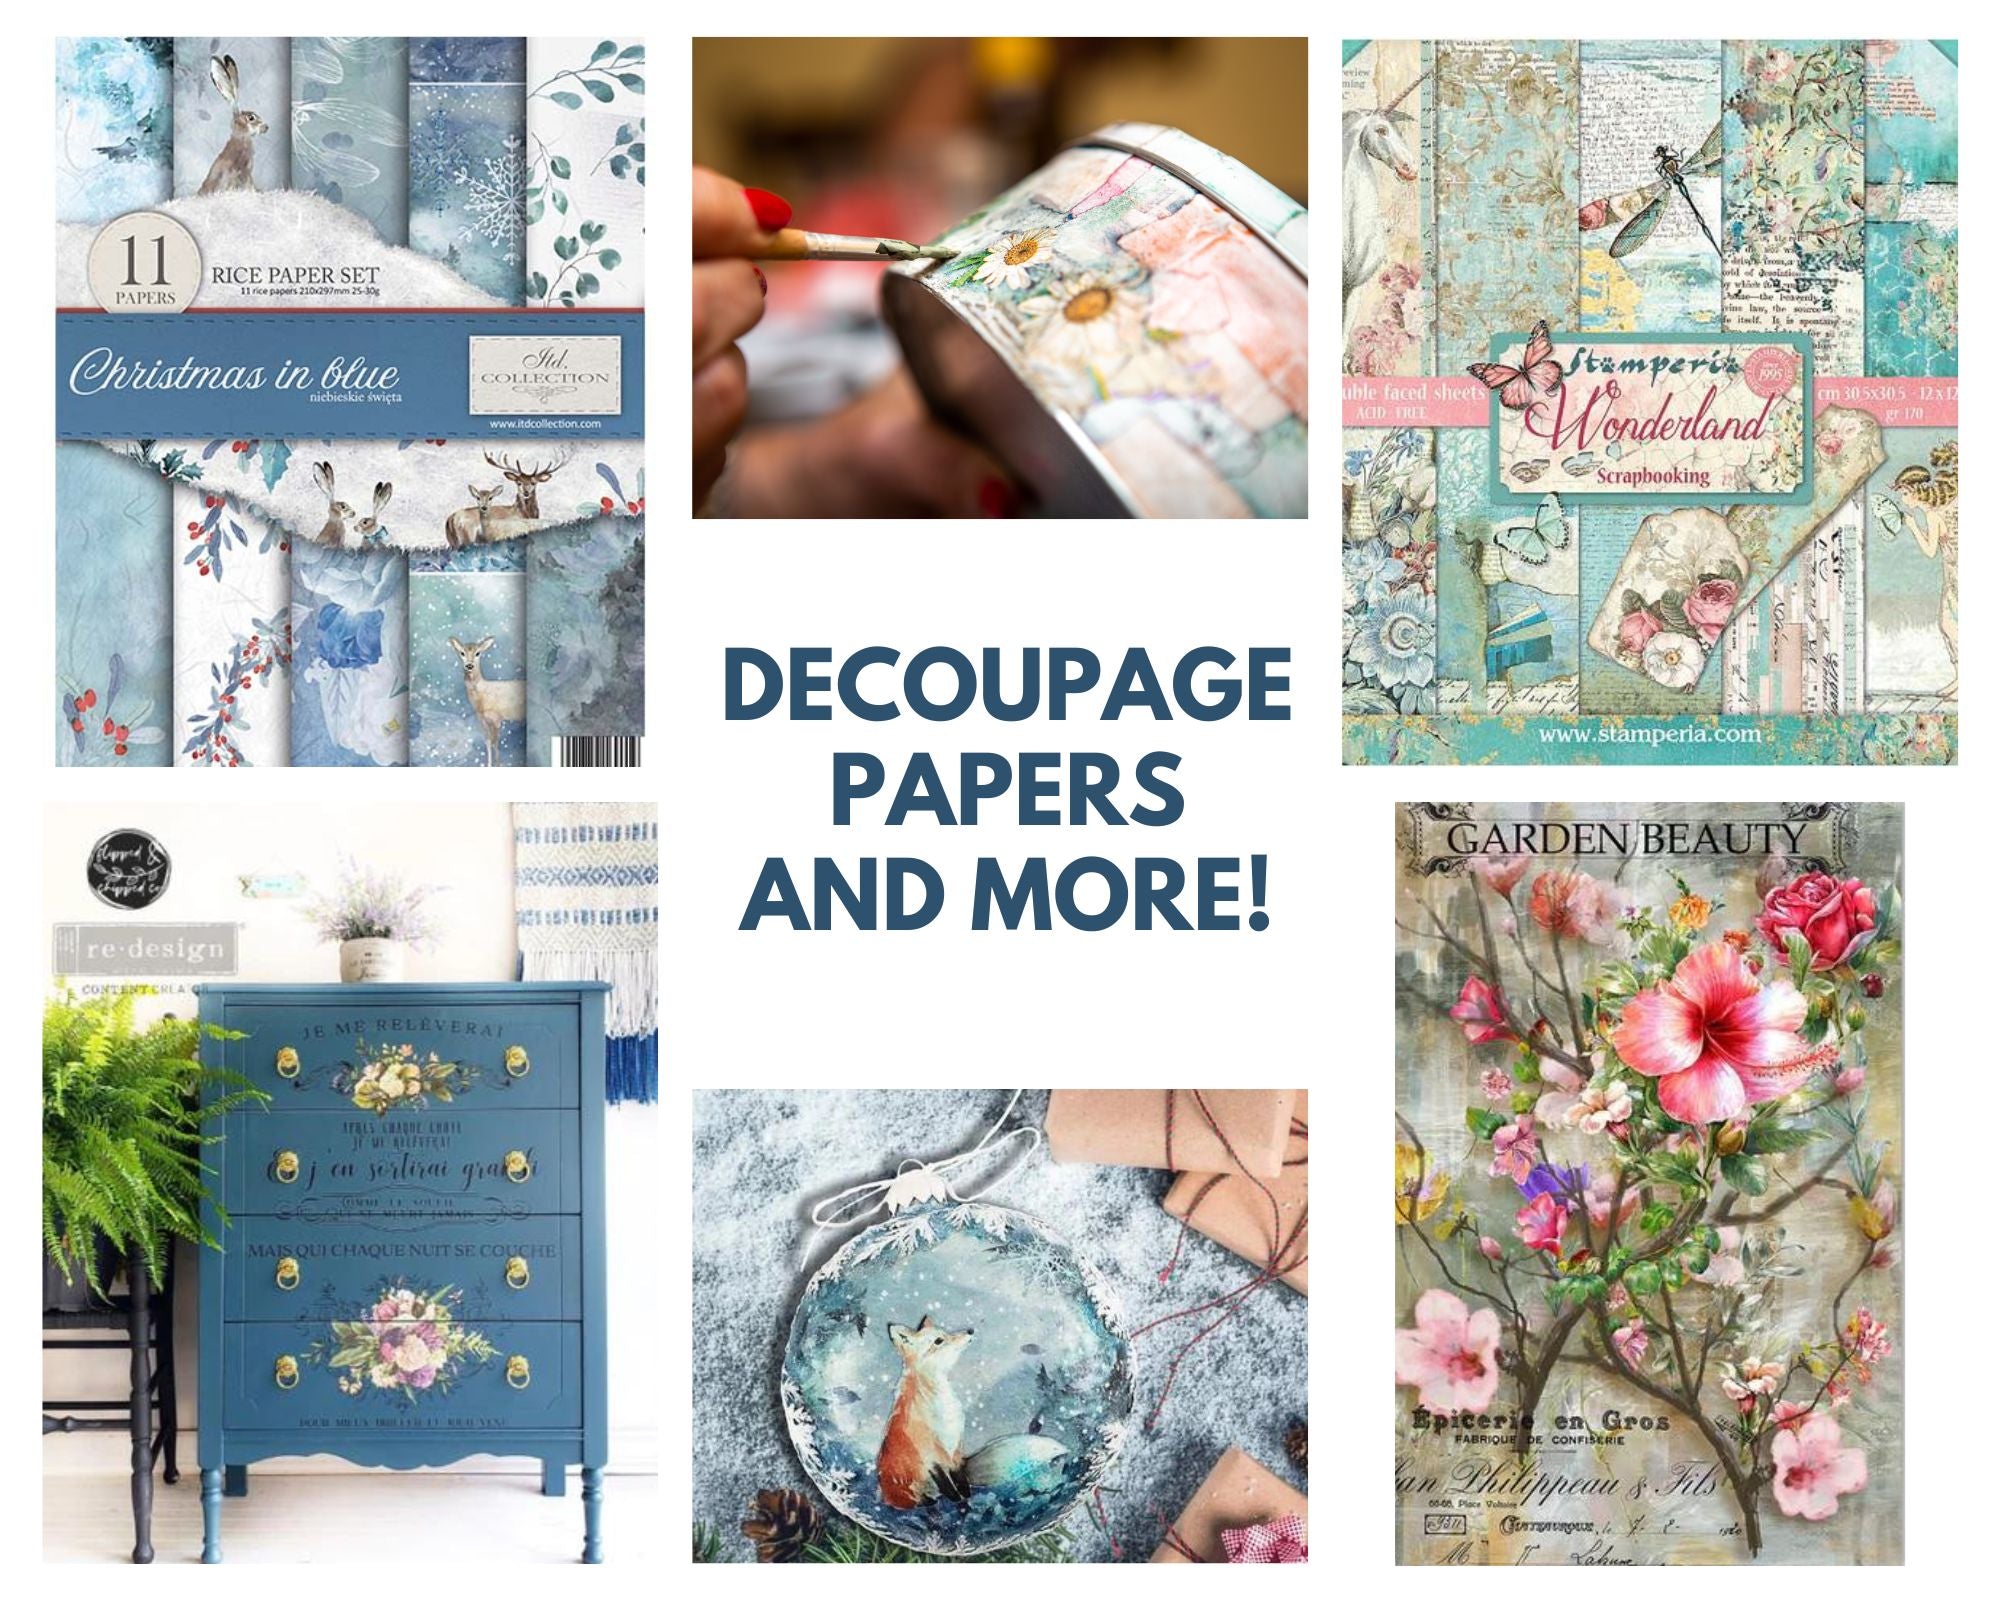 Decoupage Craft Ideas For Adults - You'll want to try - Pillar Box Blue